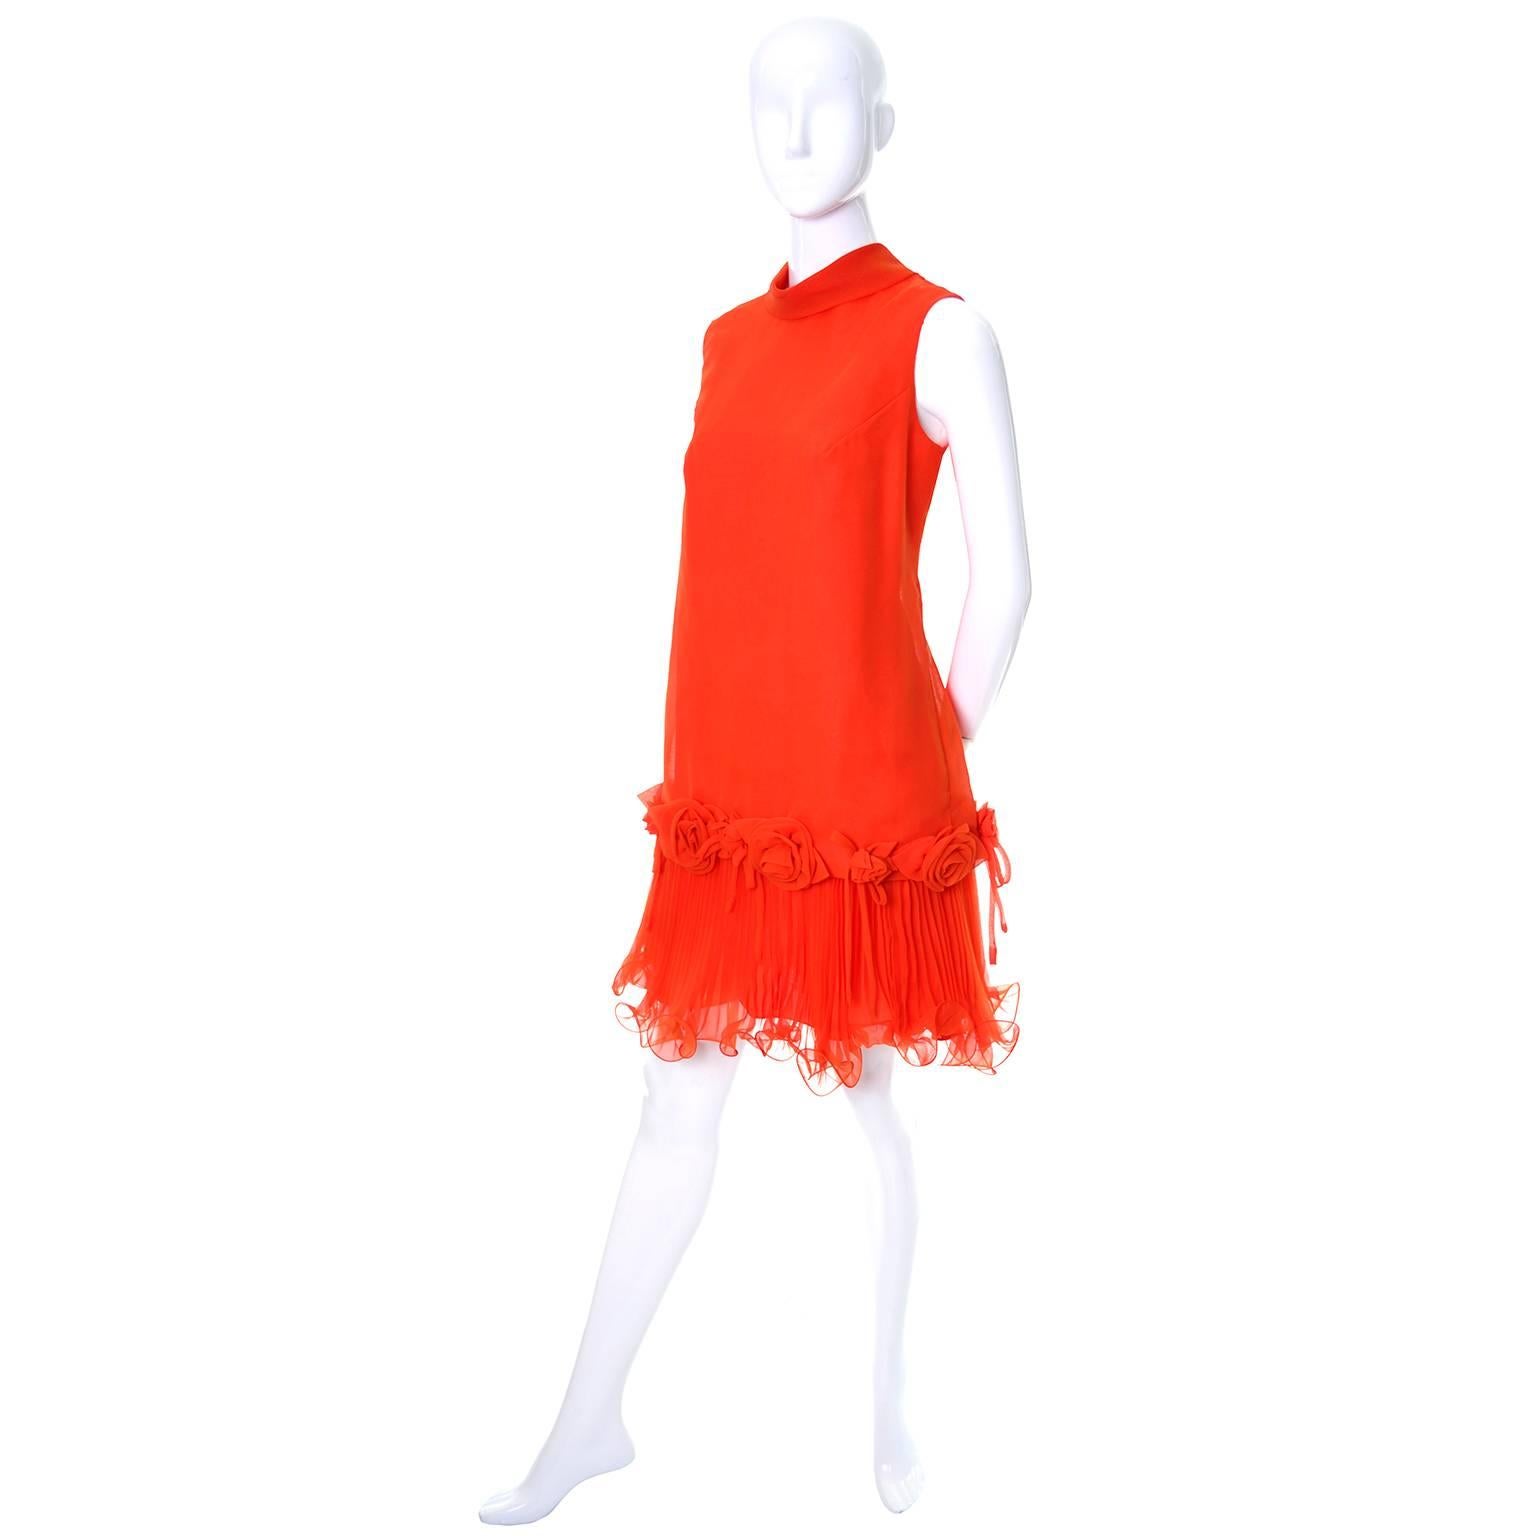 This vintage but new Jack Bryan sleeveless dress was designed by Dupuis and still has its original tag attached.  The dress is tomato orange/red chiffon over a satin underdress lining.  There is a back zipper and a great sash that ties at the neck